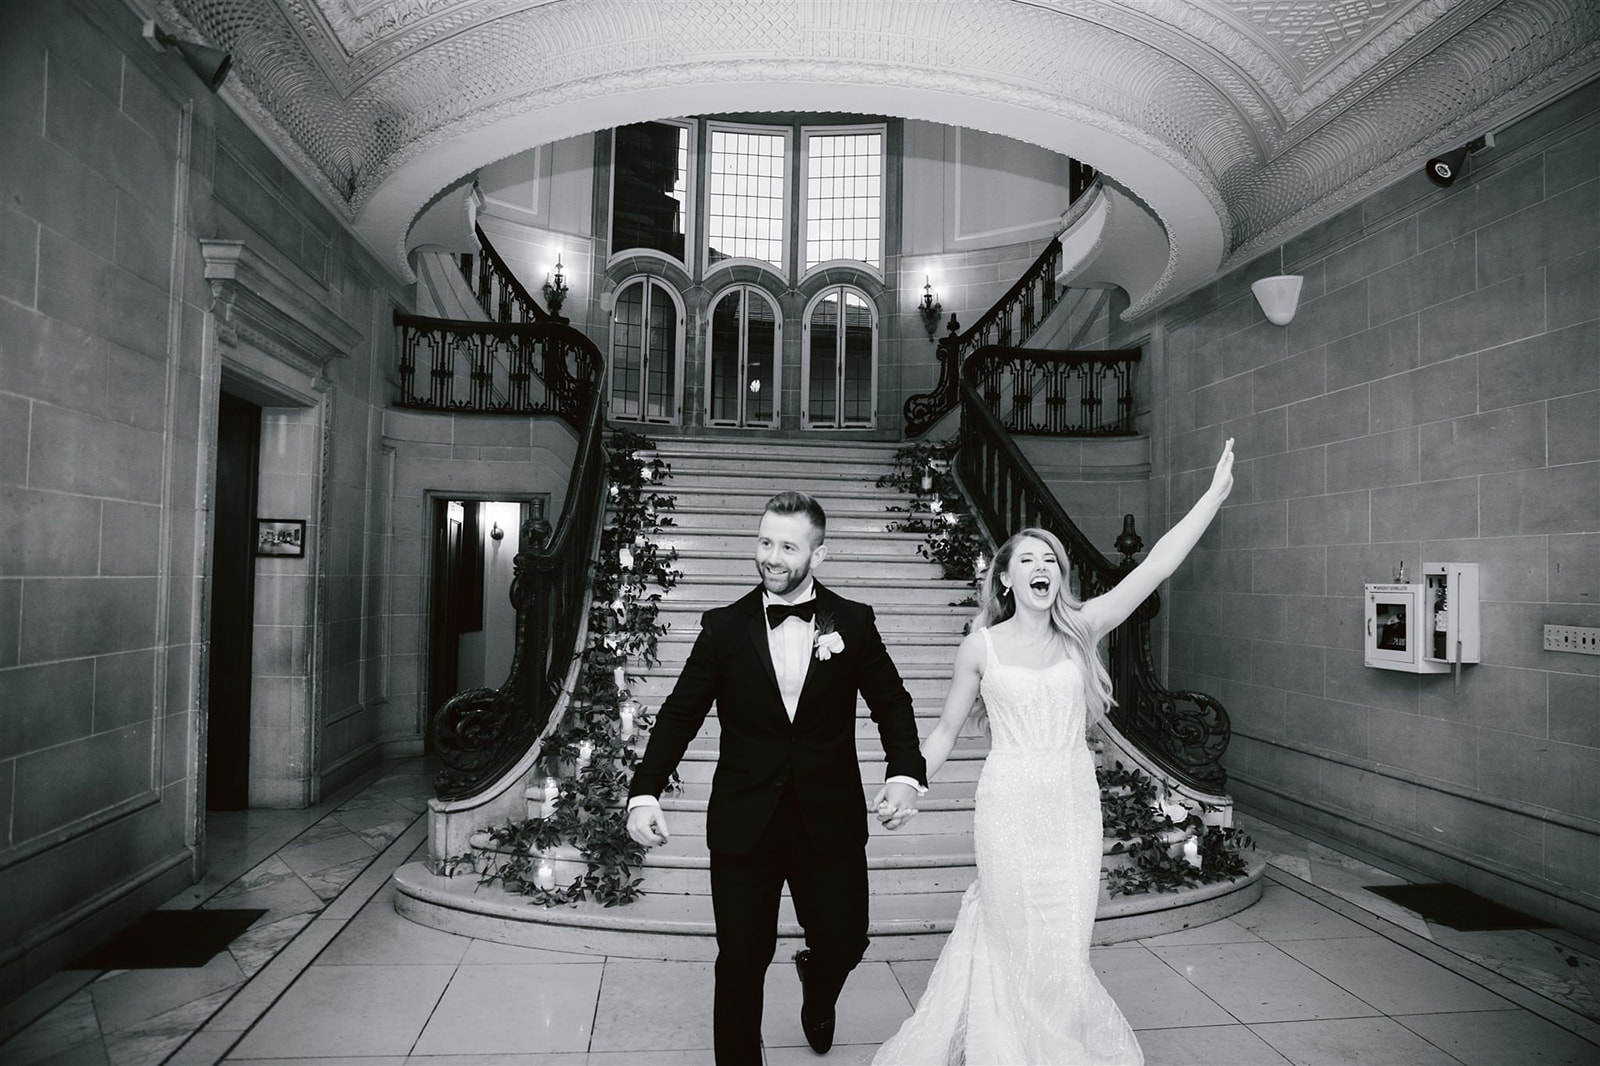 The staircase at Armour House is a majestic backdrop as the bride and groom make their entrance.